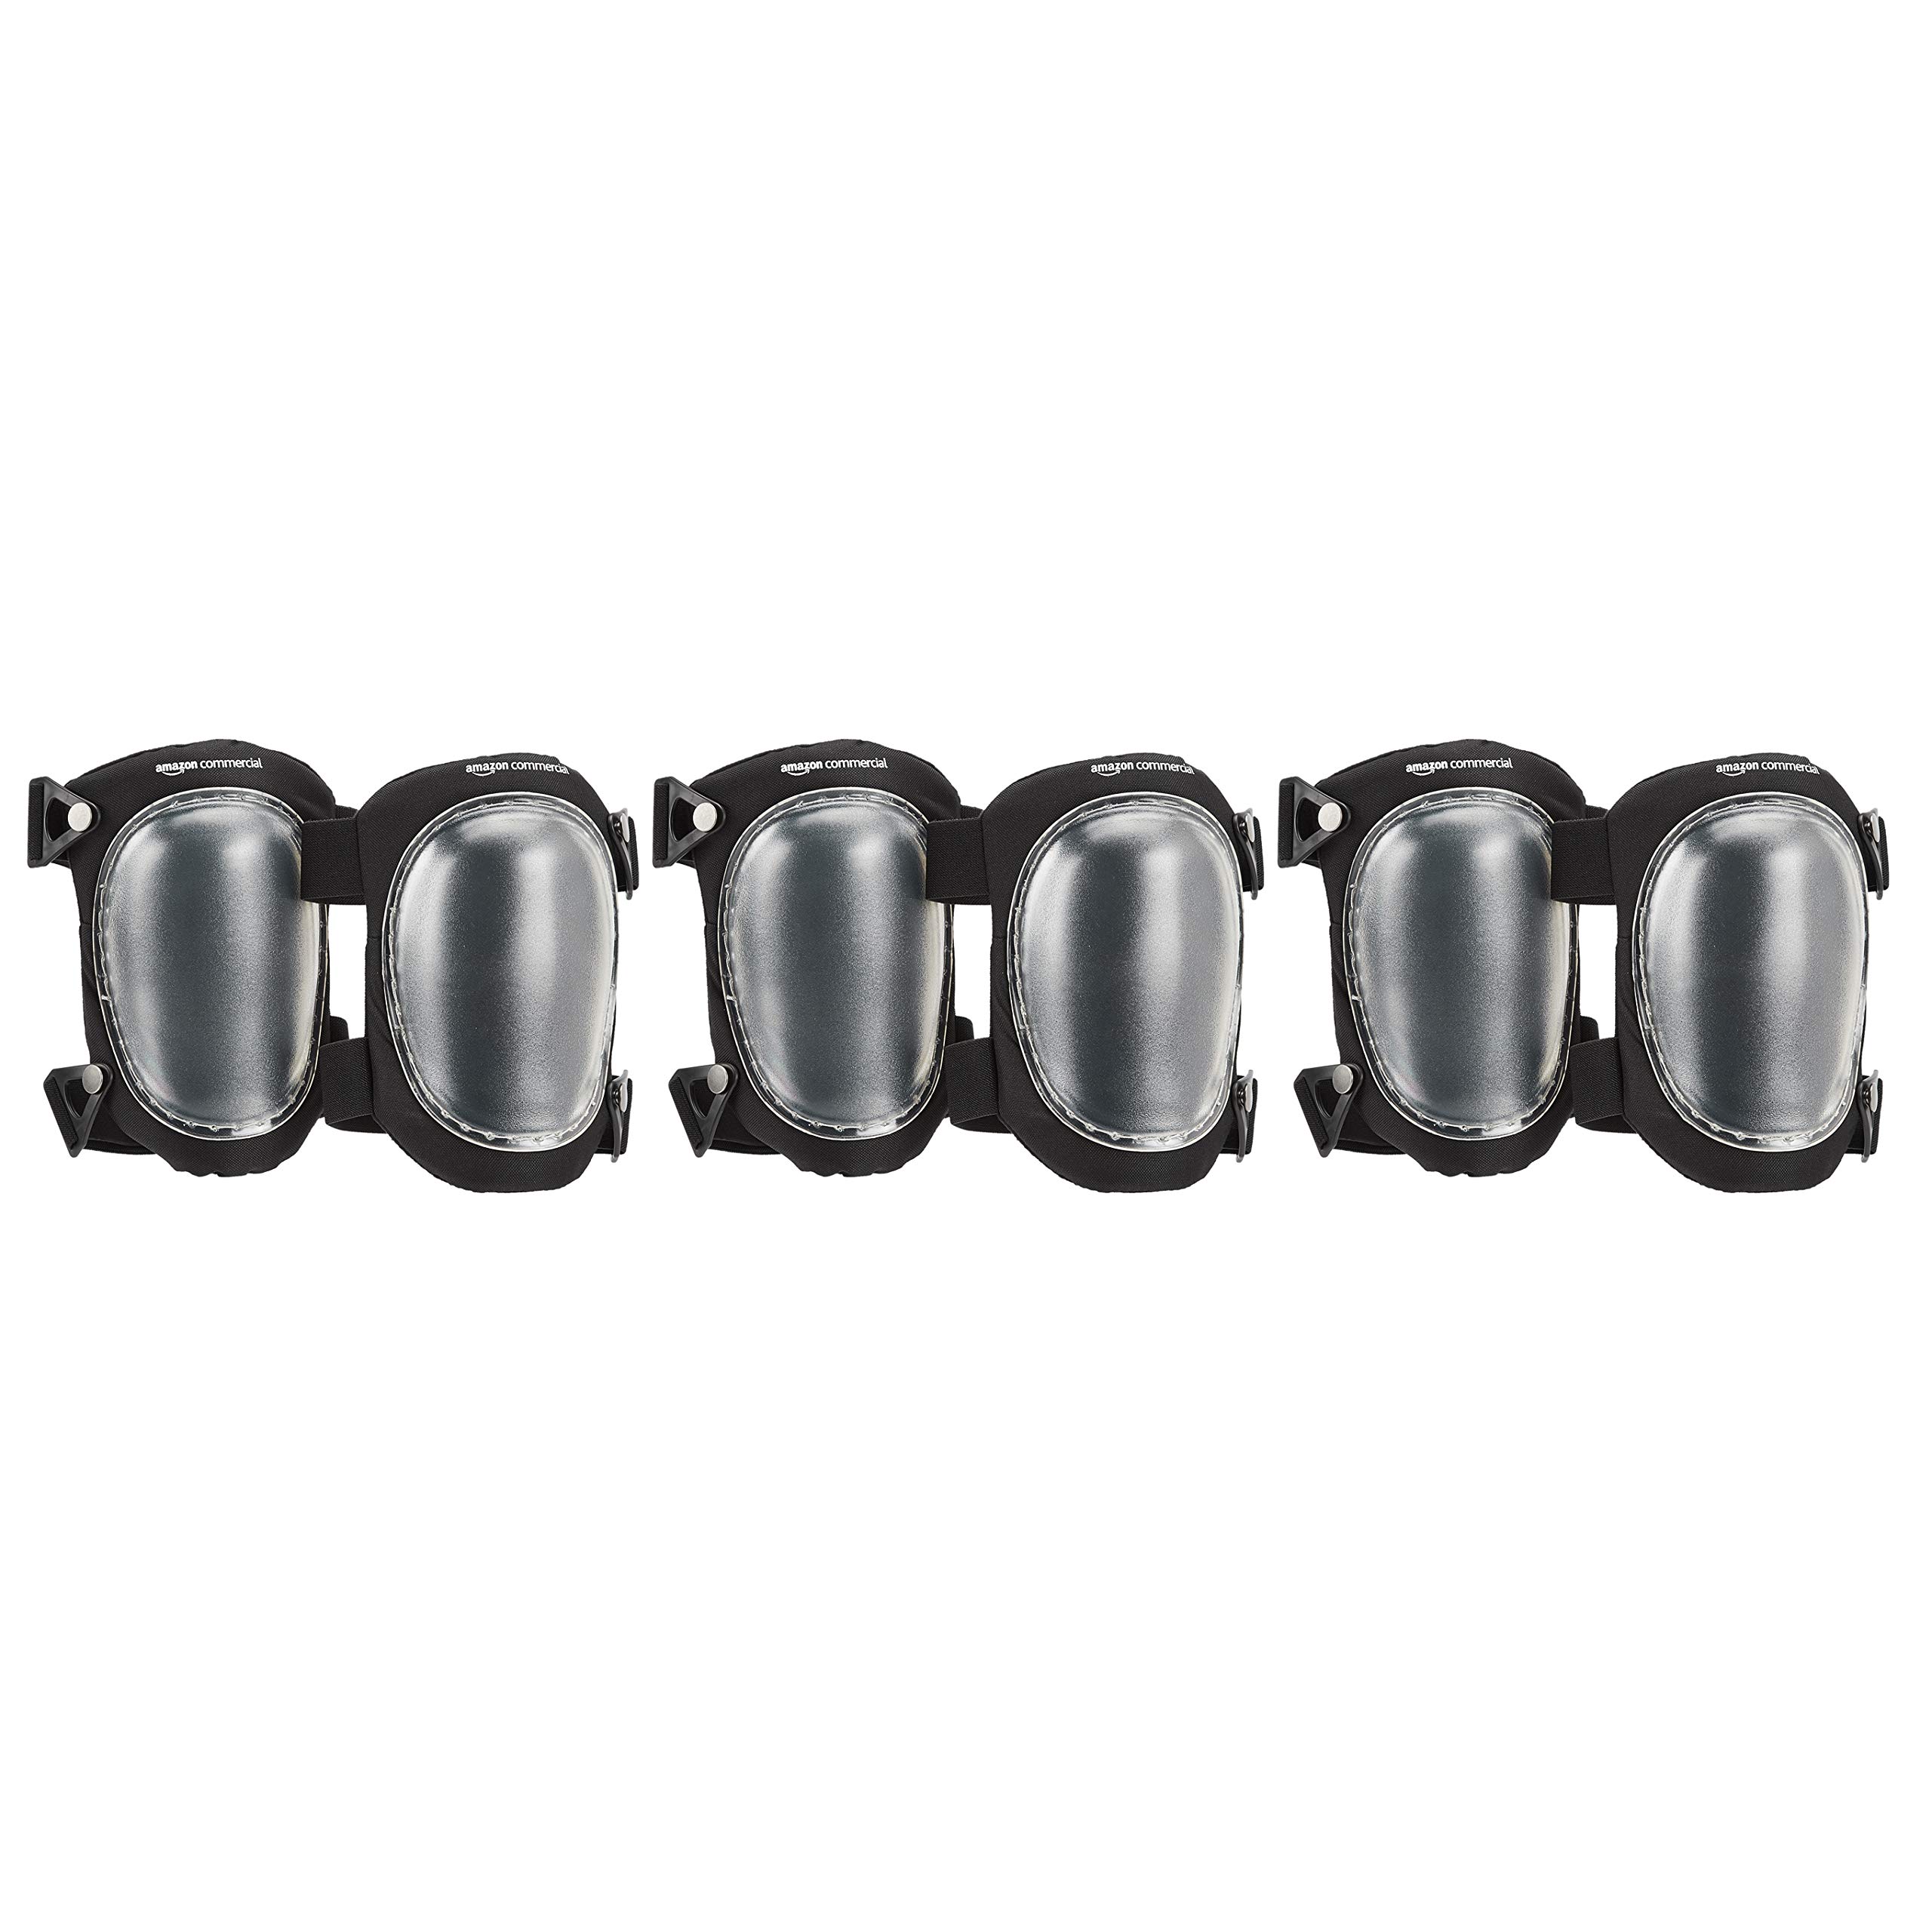 AmazonCommercial Easy swivel Knee Pads, 9 in, Clear, 3 pairs $7.81 FS w/ Prime